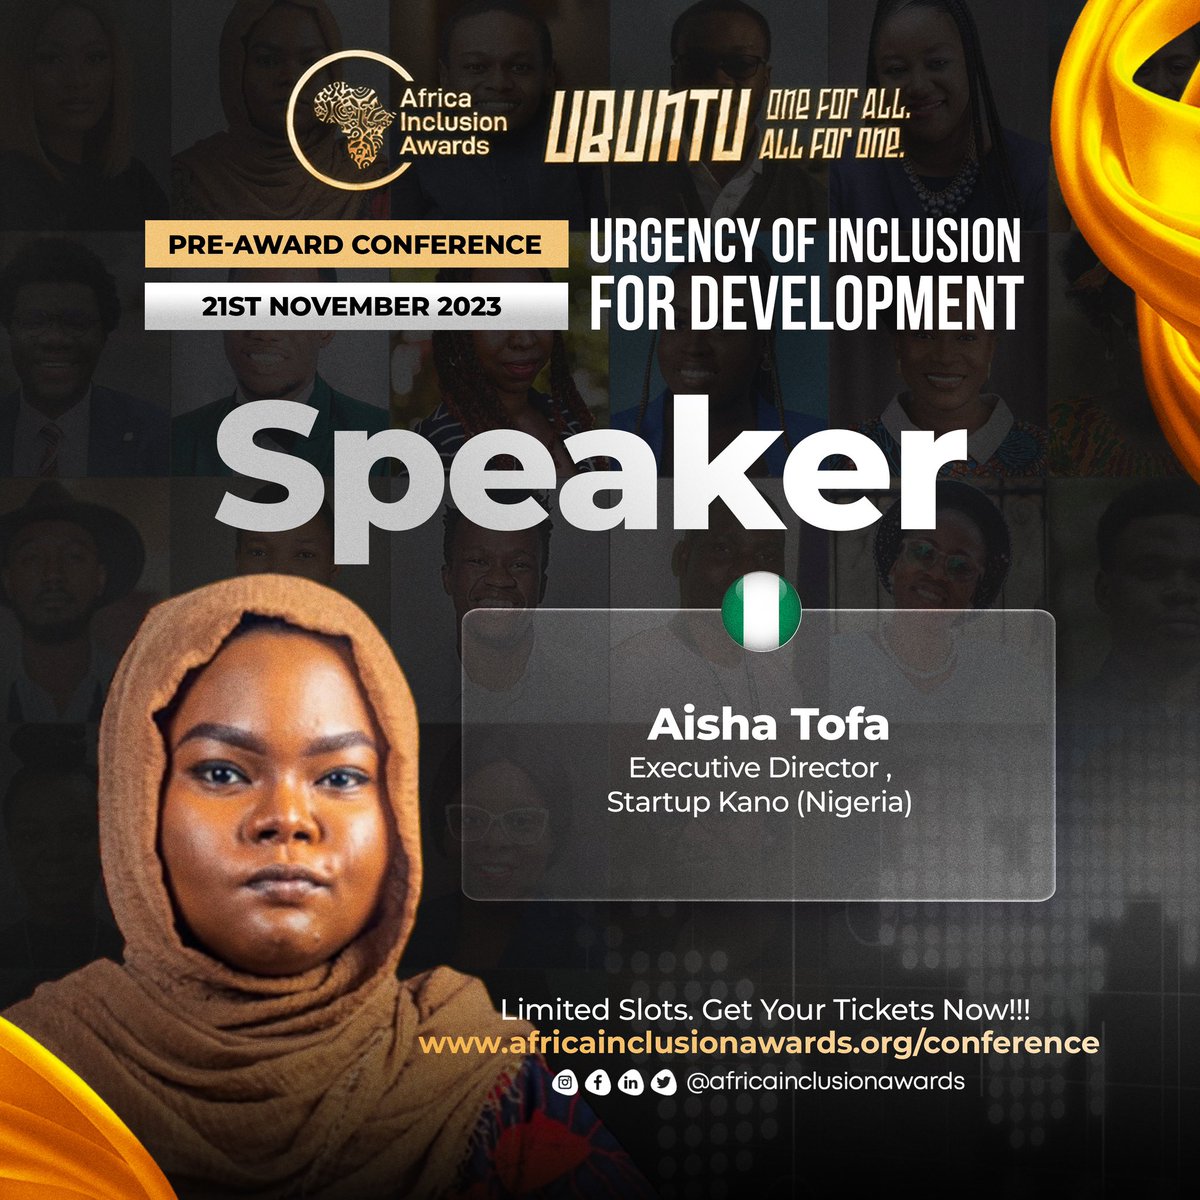 Register for the Inclusion Conference  on Day 1 of Africa Inclusion Awards 2023. 

🔔Confirmed Speaker and Partner: 
Aisha Tofa, Founder/CEO Startup Kano @StartupKano 

Visit africainclusionawards.org/conference to get started. 

#Africainclusionaward #Aia2023